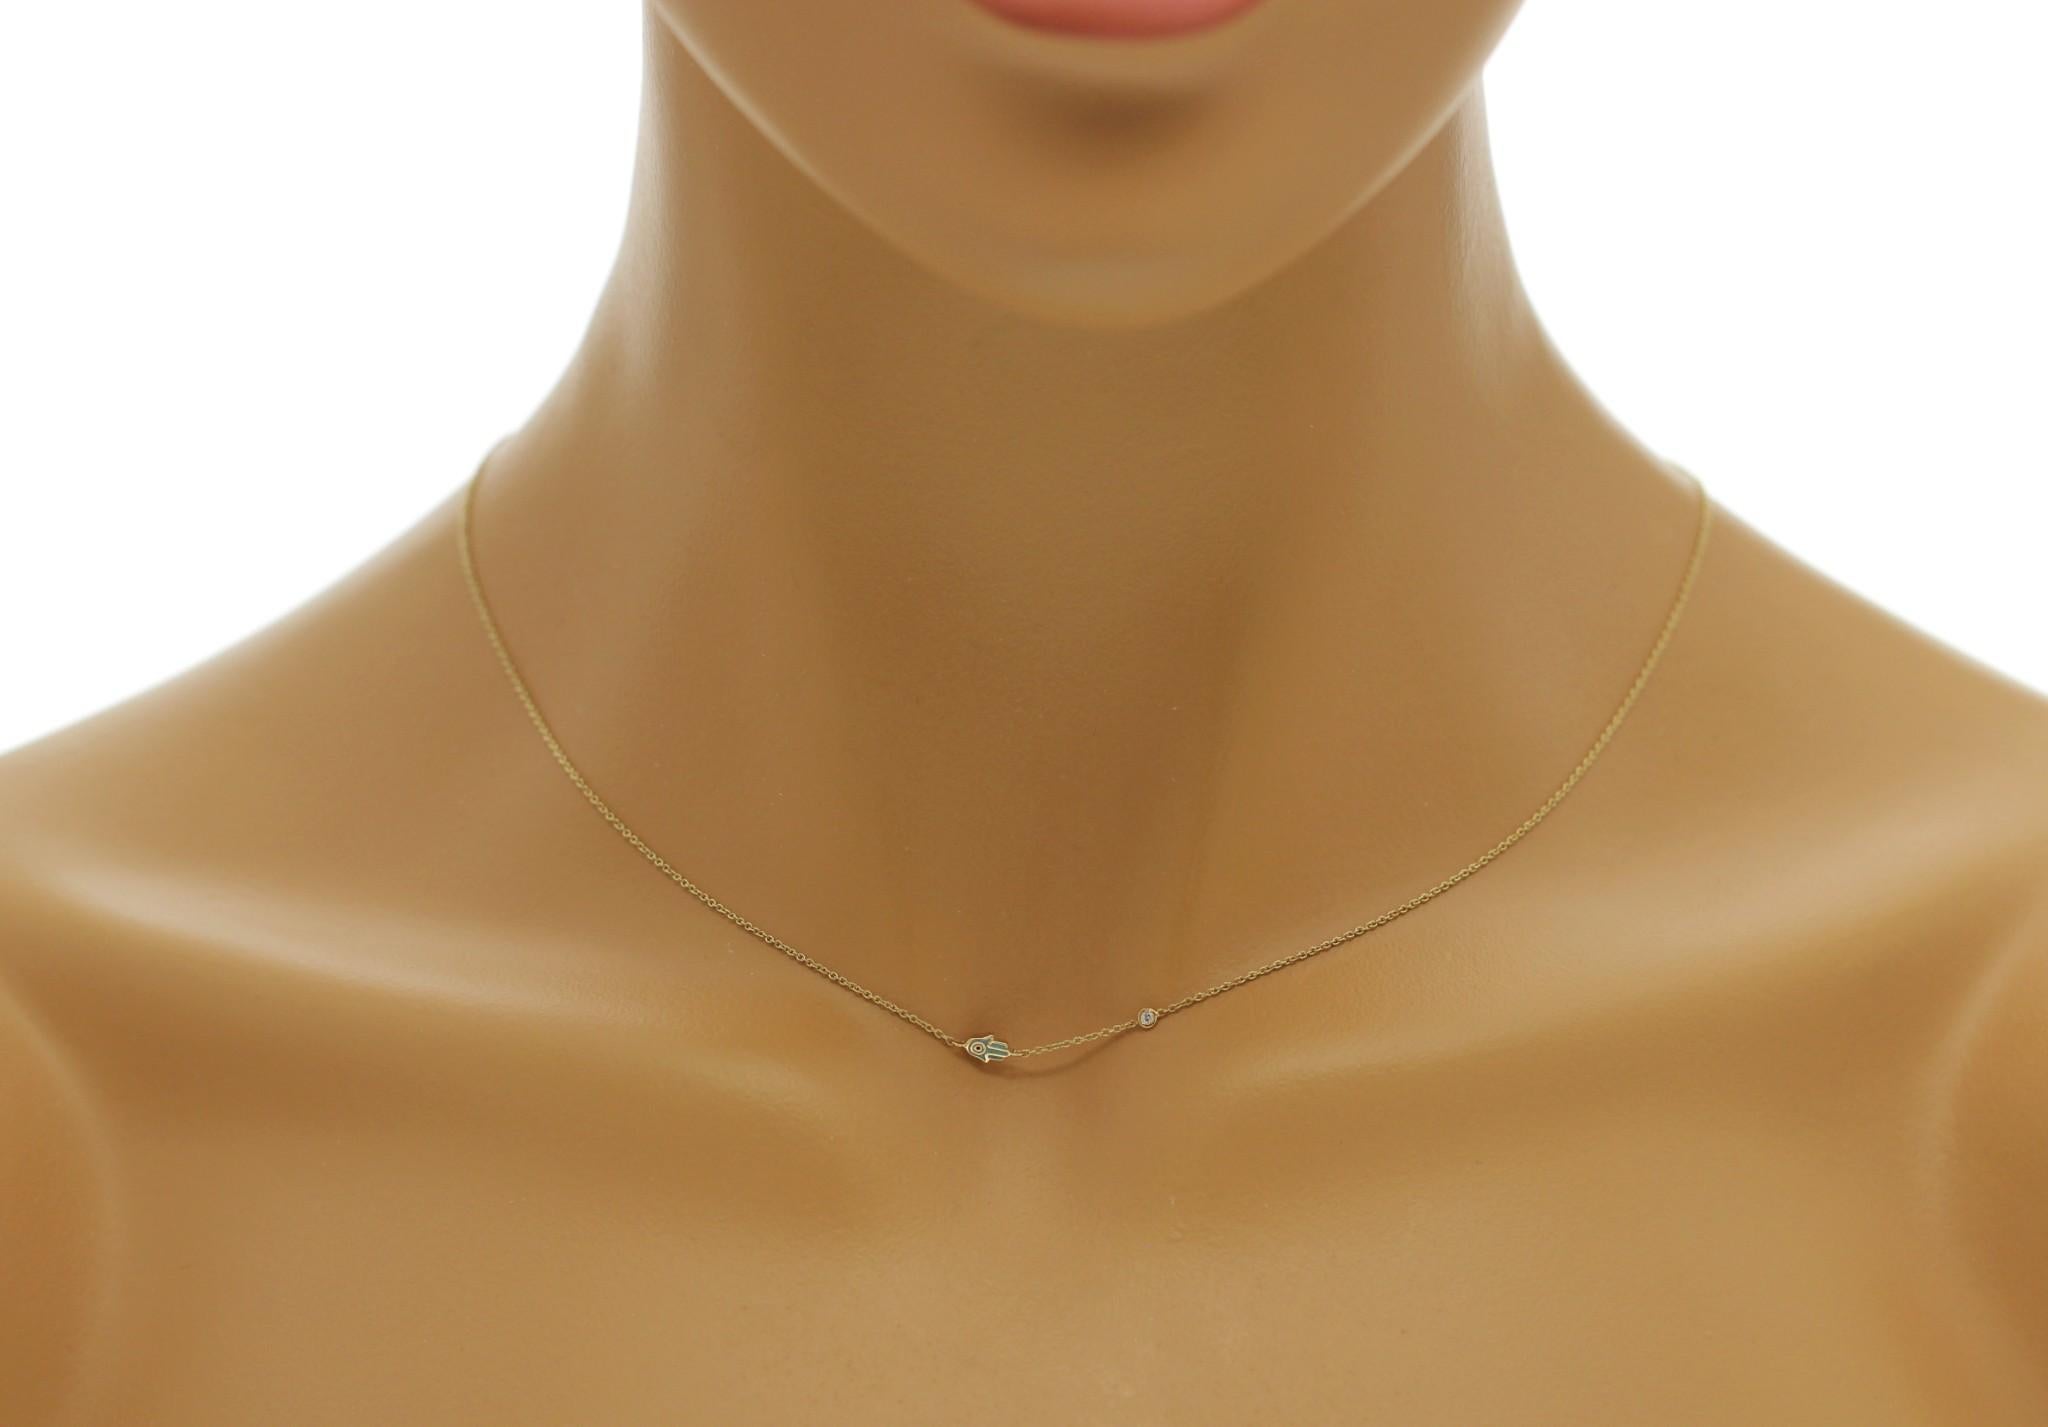 100% Authentic, 100% Customer Satisfaction

Pendant: 3.6 mm

Chain: 0.5 mm

Size: 16-18 Inches

Metal: 14K Yellow Gold

Hallmarks: 14K

Total Weight: 1.6 Grams

Stone Type: Diamonds

Condition: Like New

Estimated Price: $430

Stock Number: N218